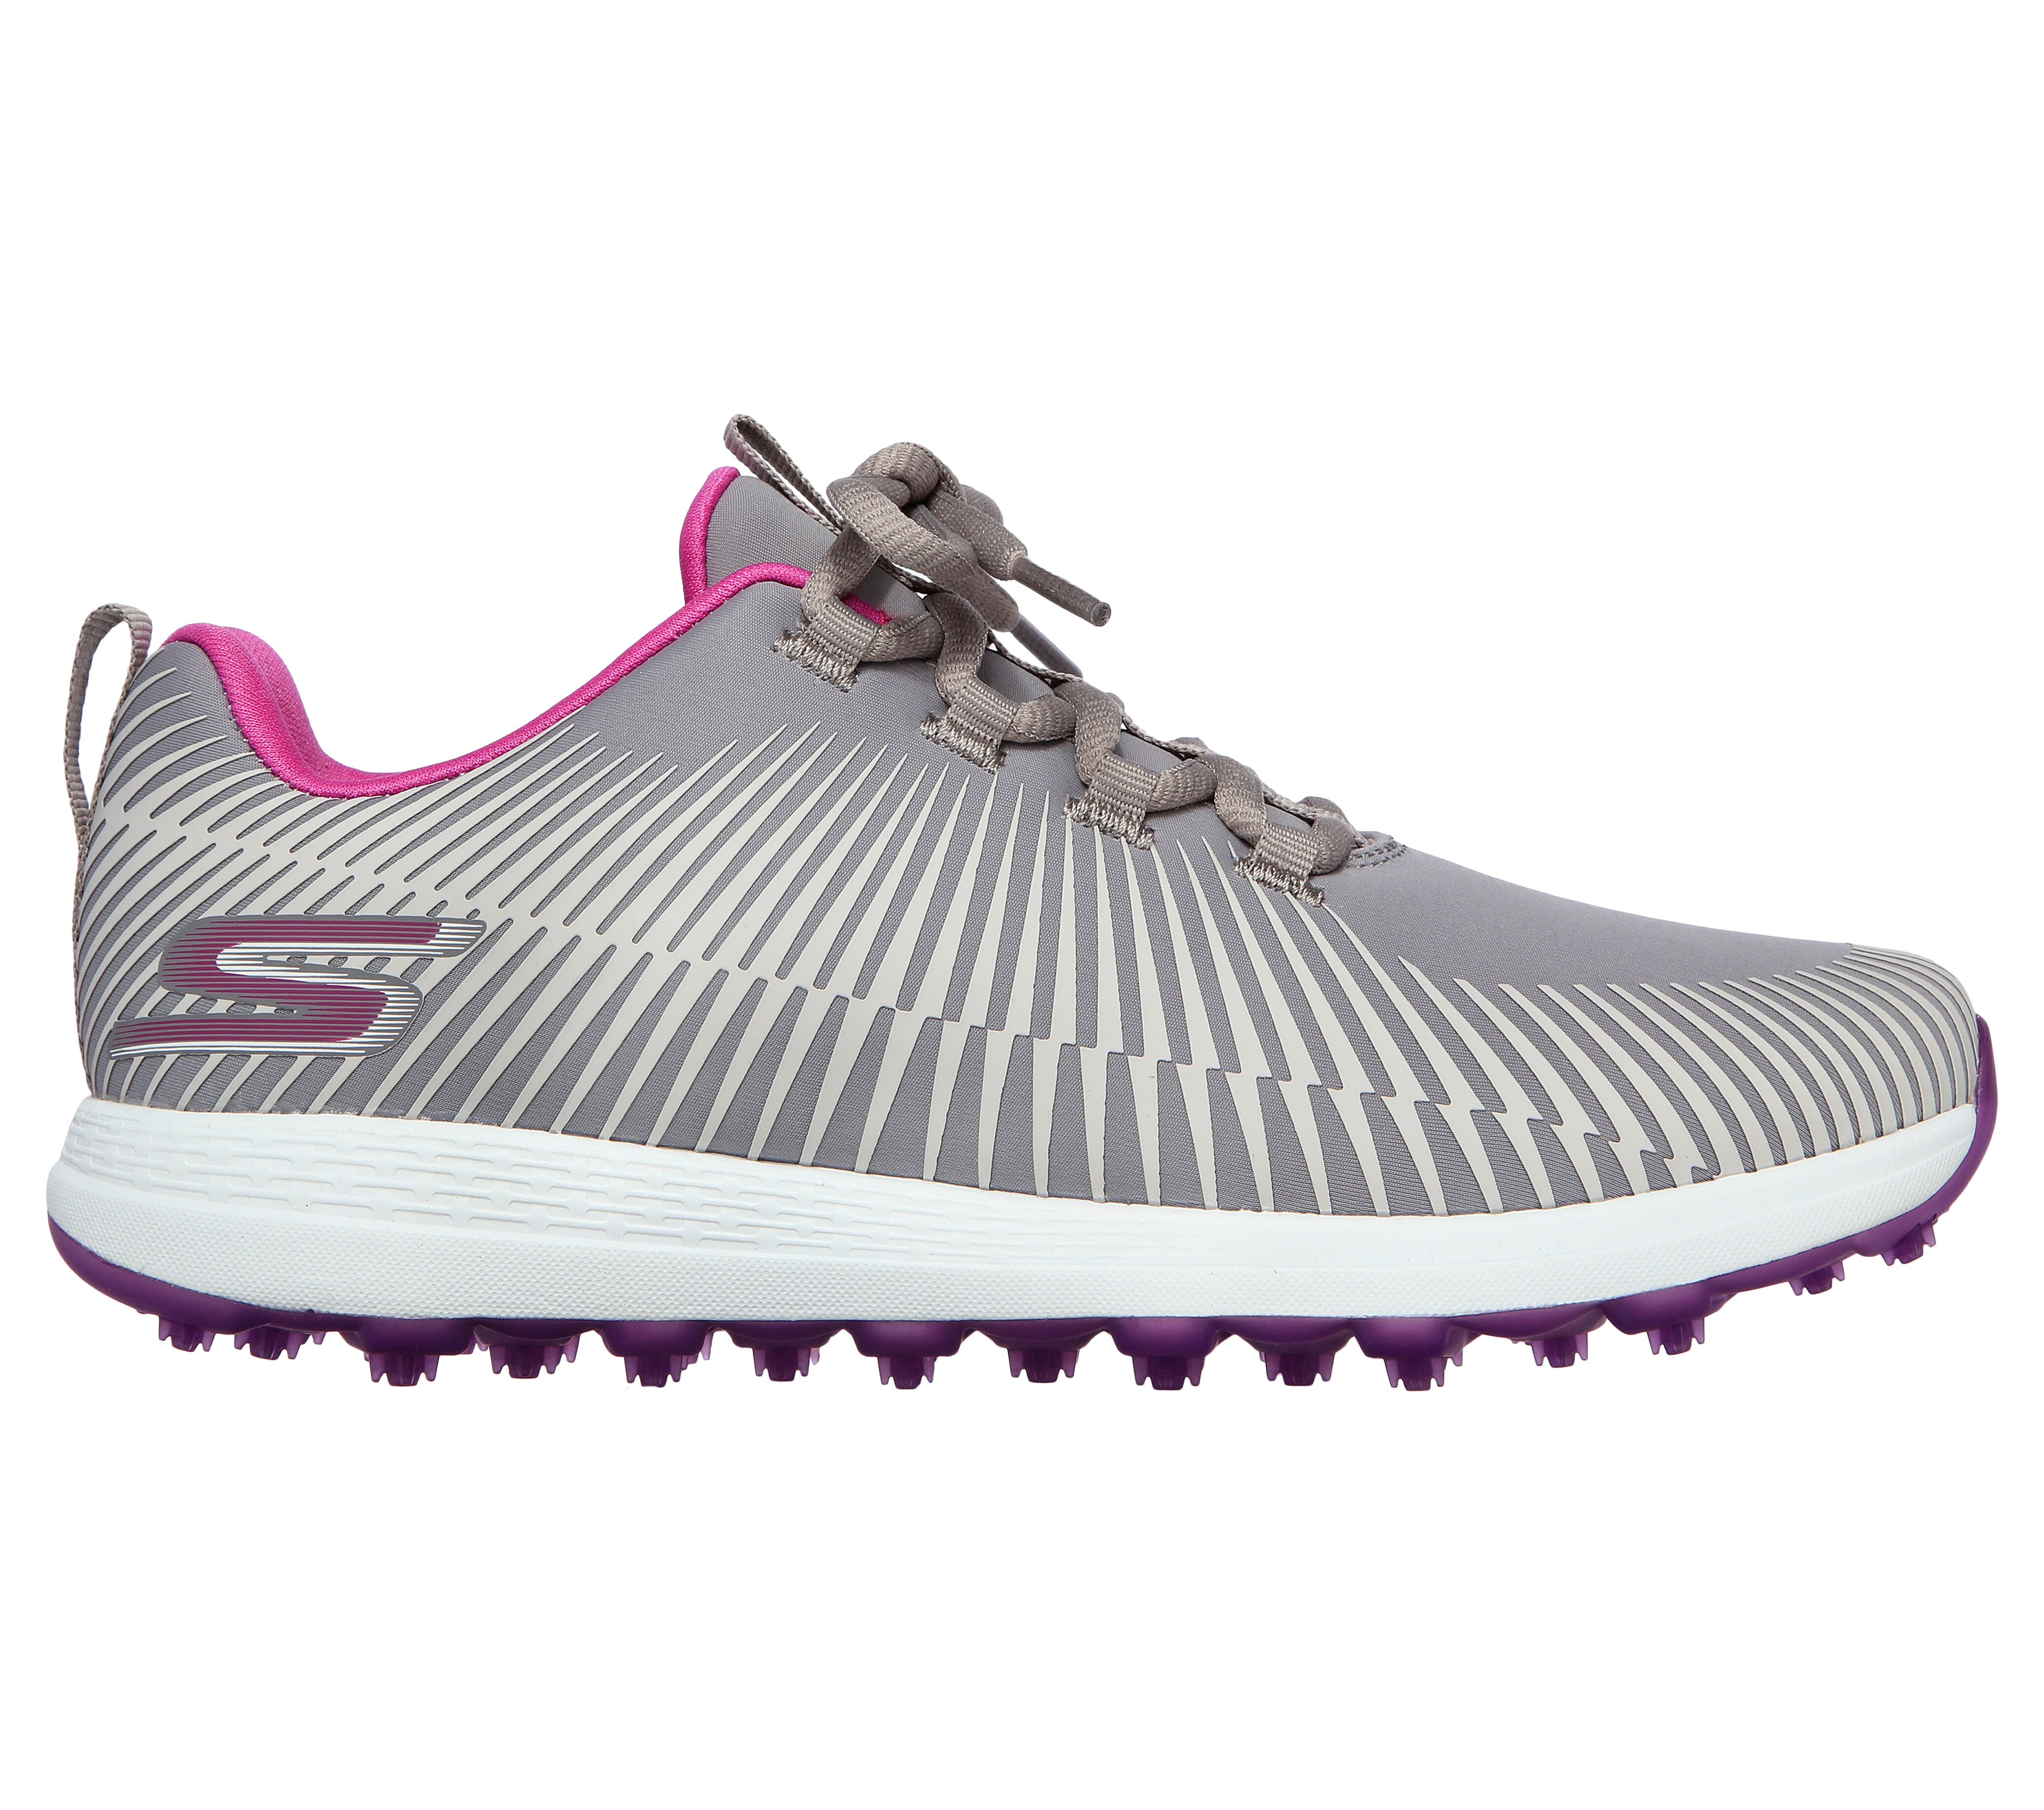 skechers golf shoes canada